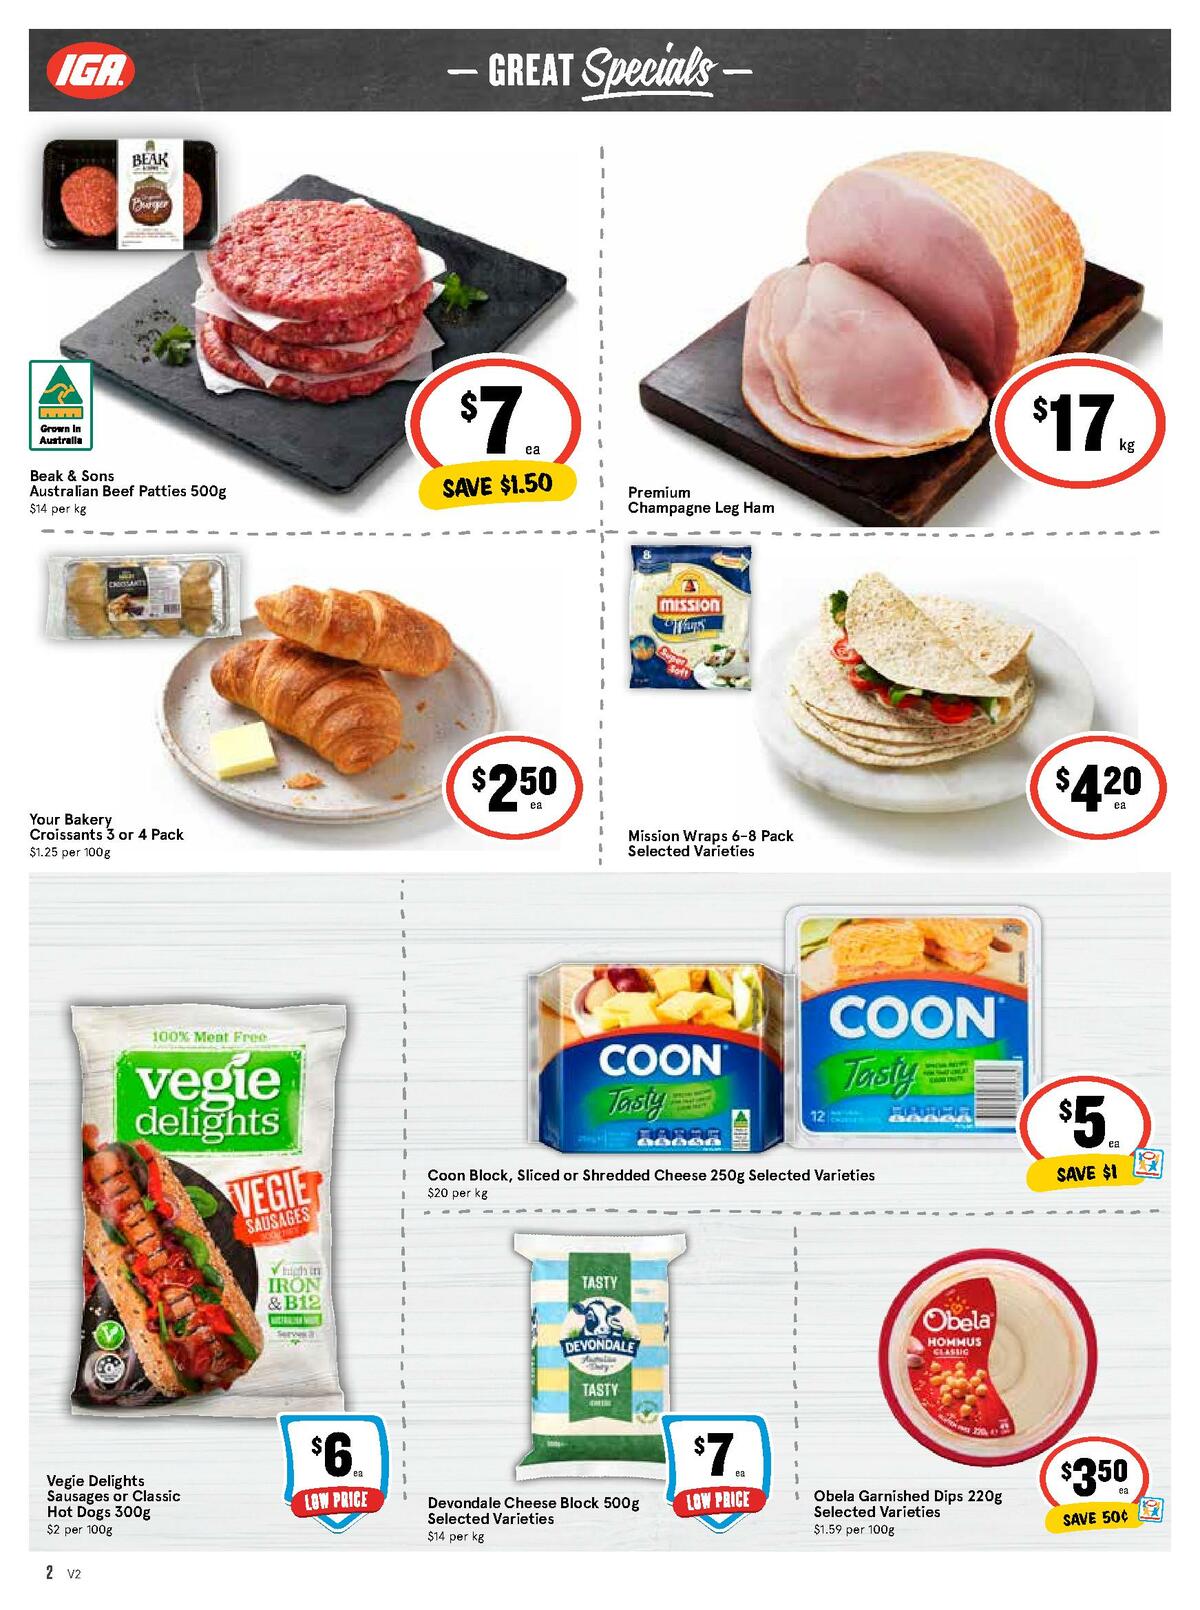 IGA Catalogues from 15 April